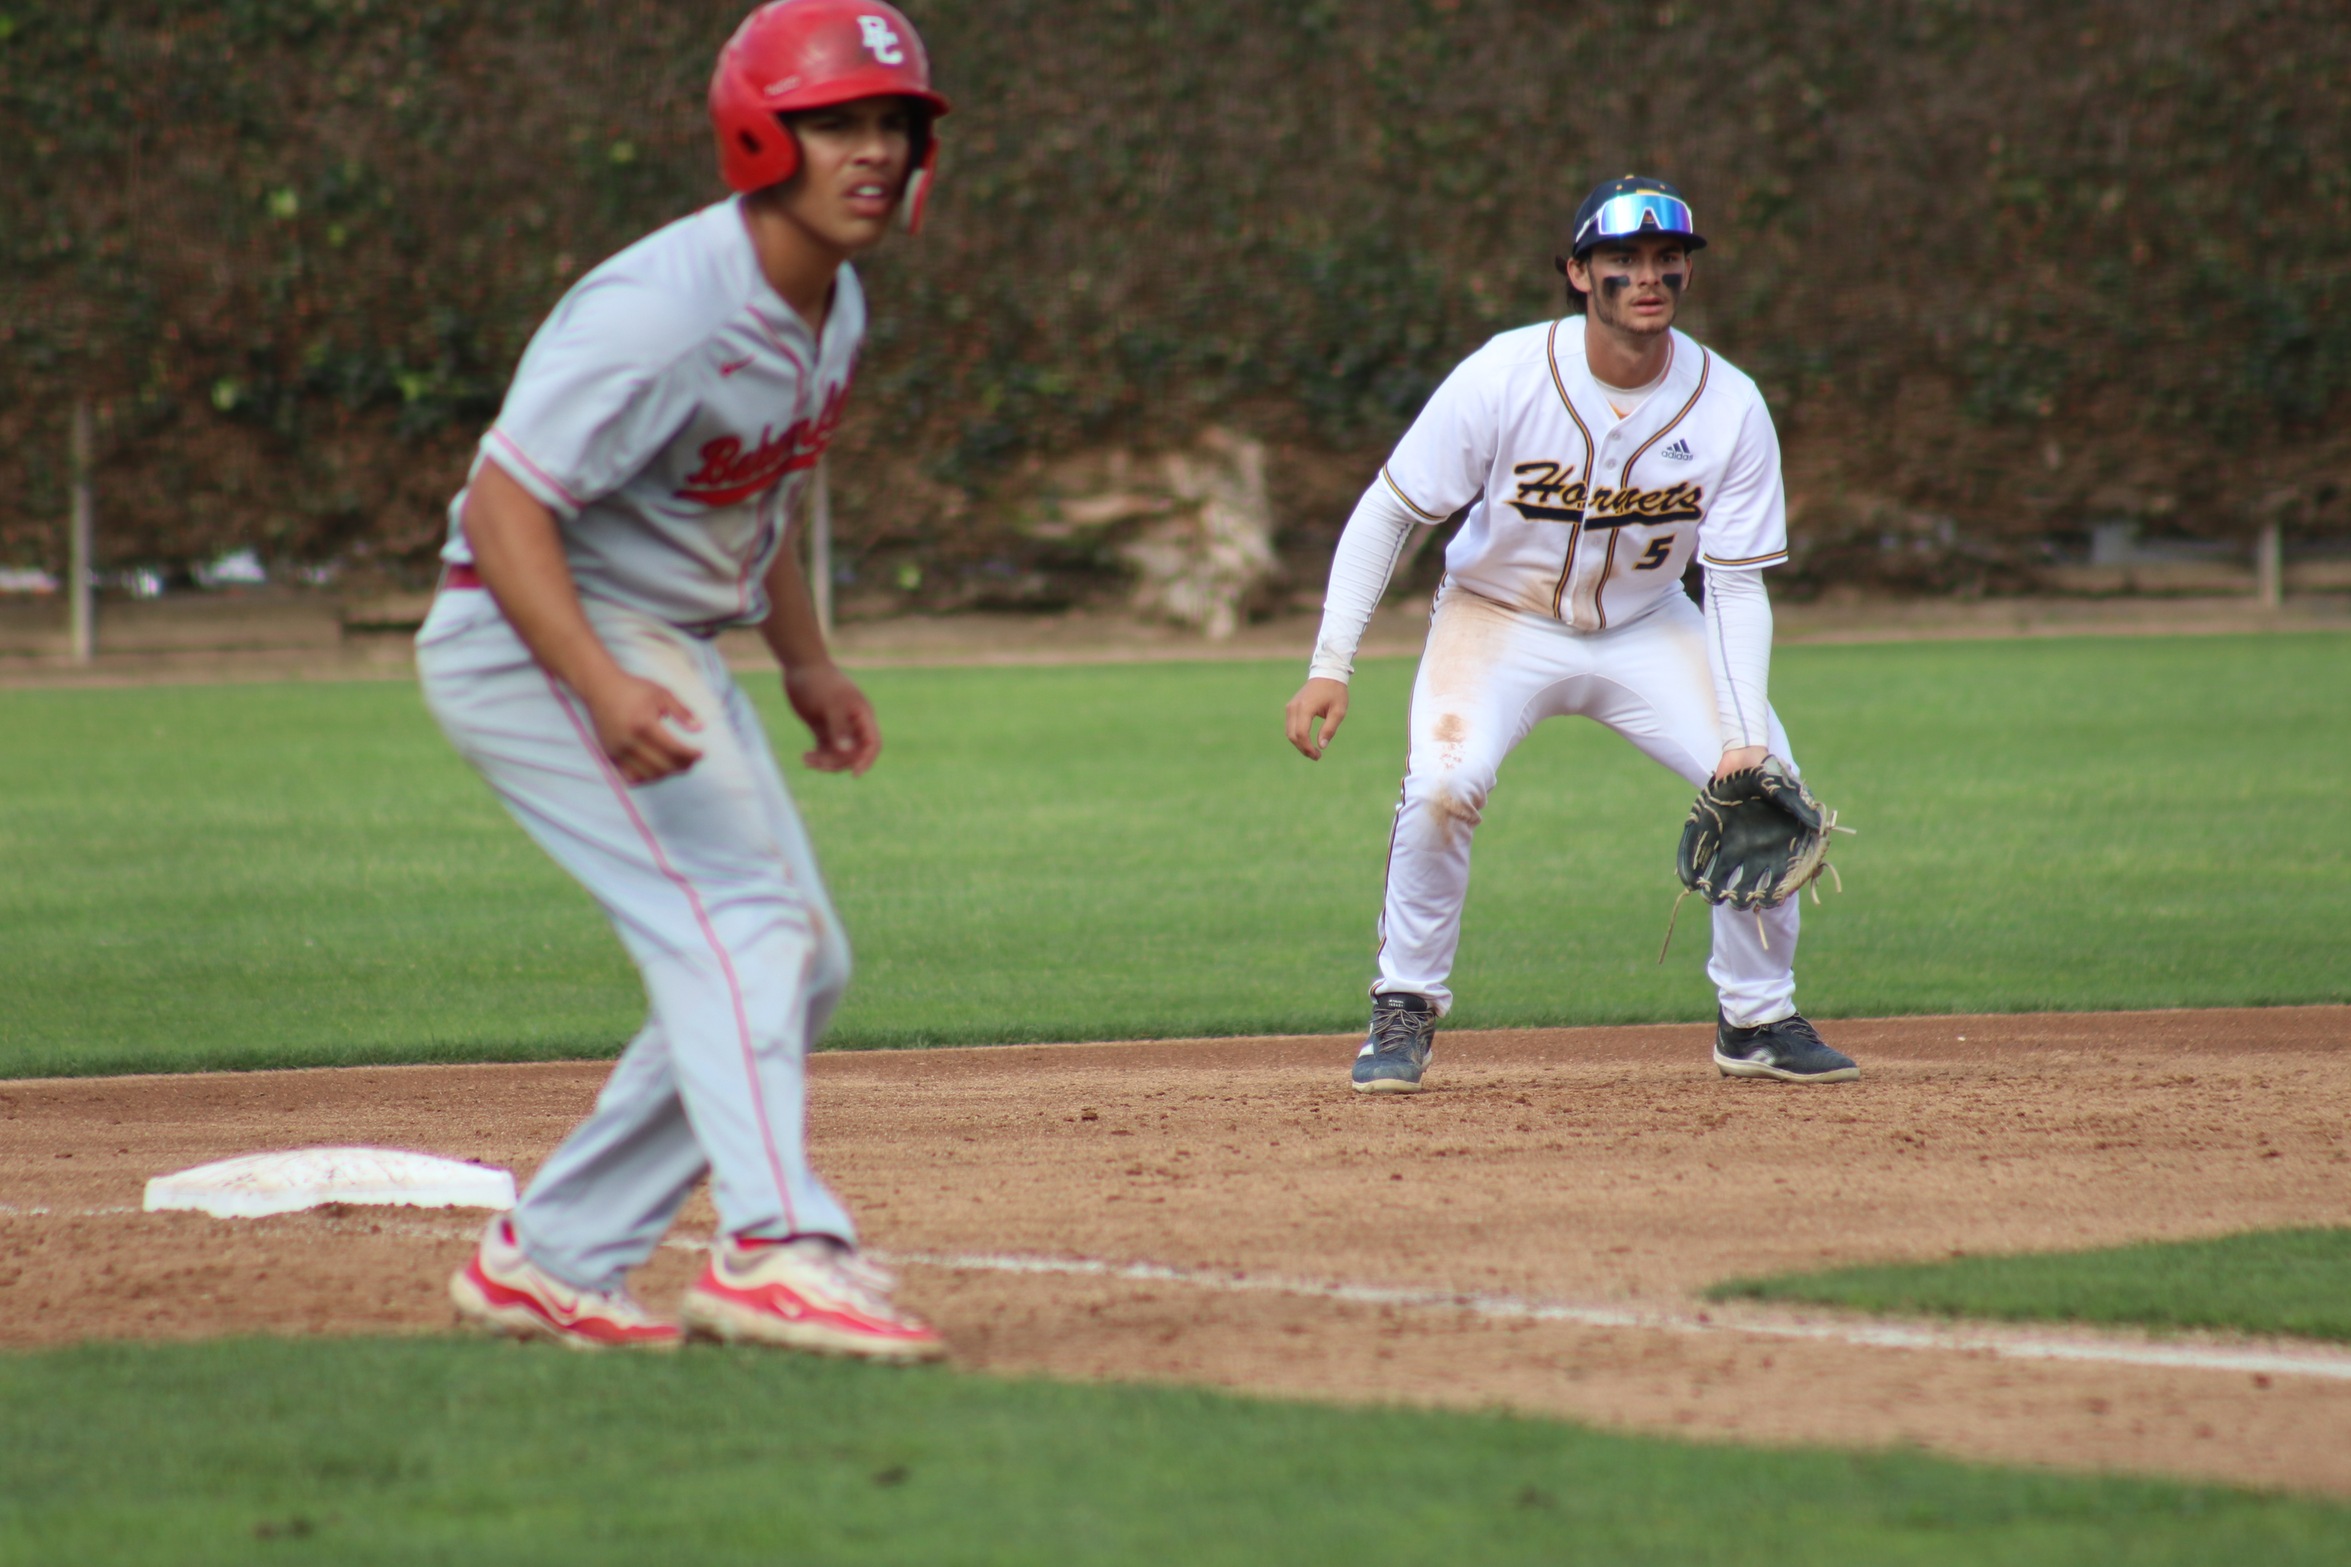 HORNETS TAKE DOWN BAKERSFIELD IN EXTRAS